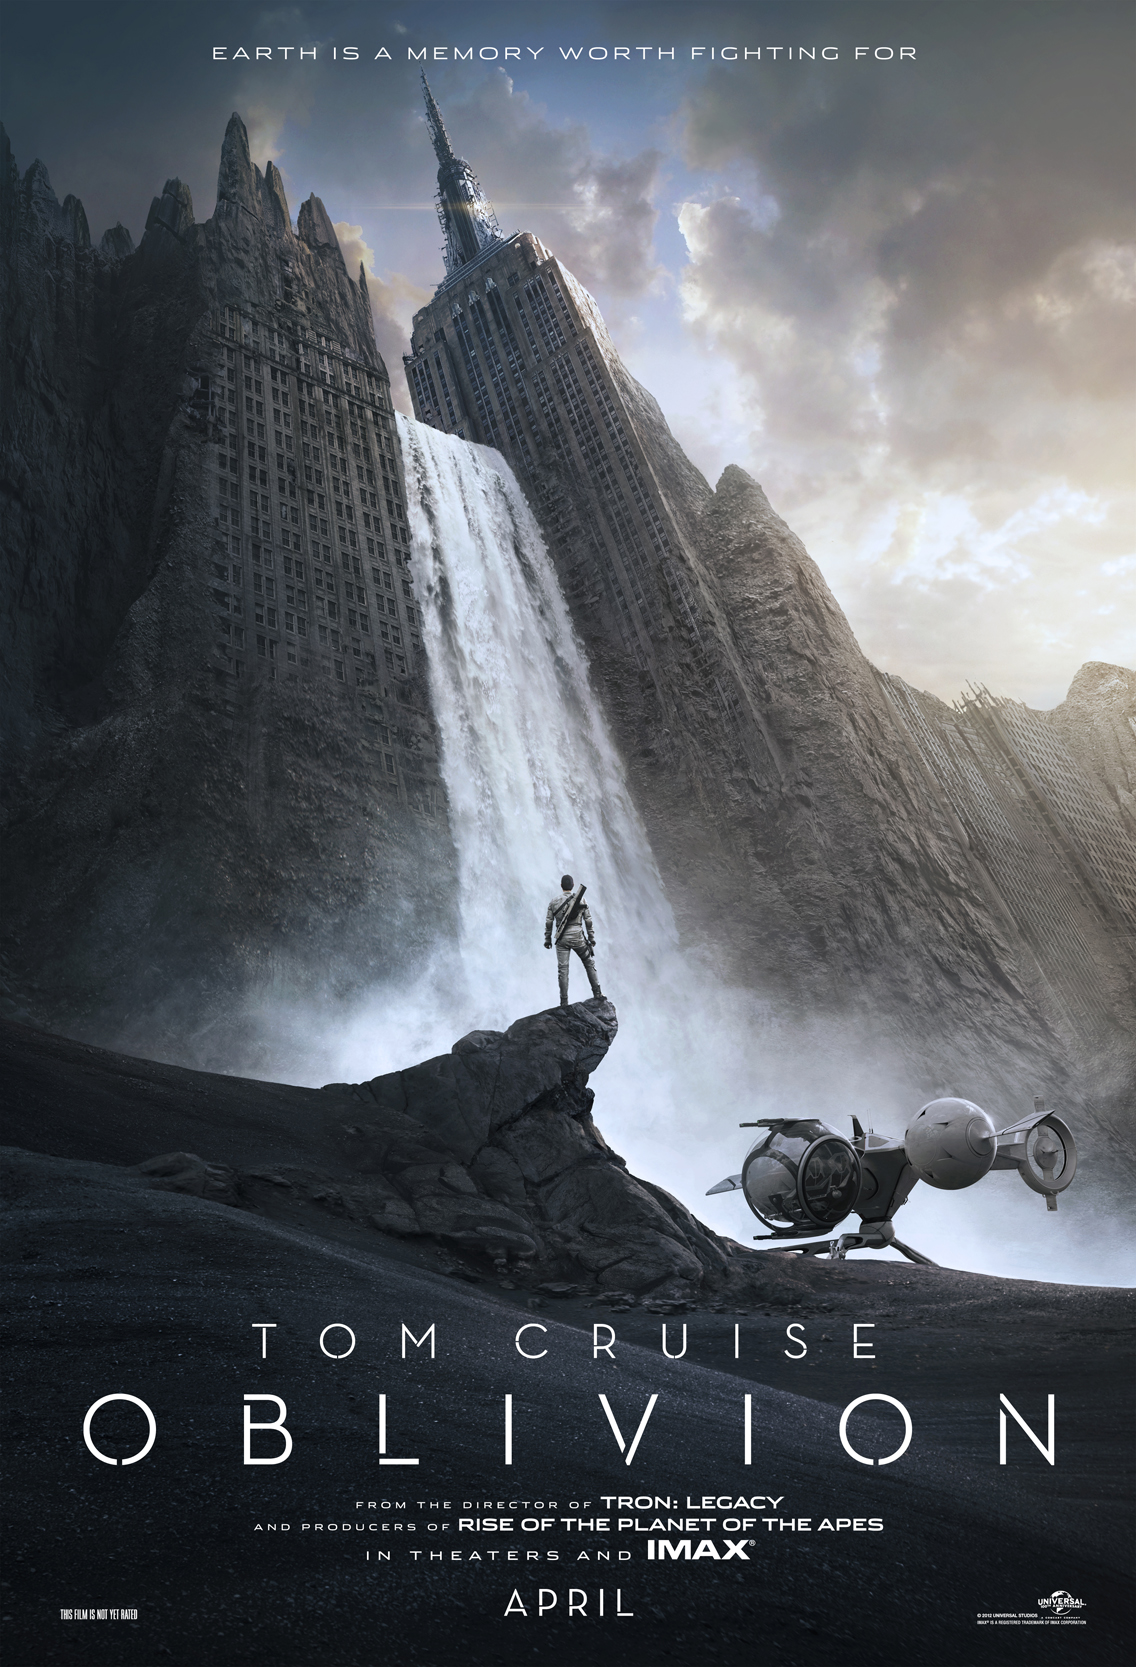 Tom Cruise Encounters a Dystopian New York City In First Poster For 'Oblivion'